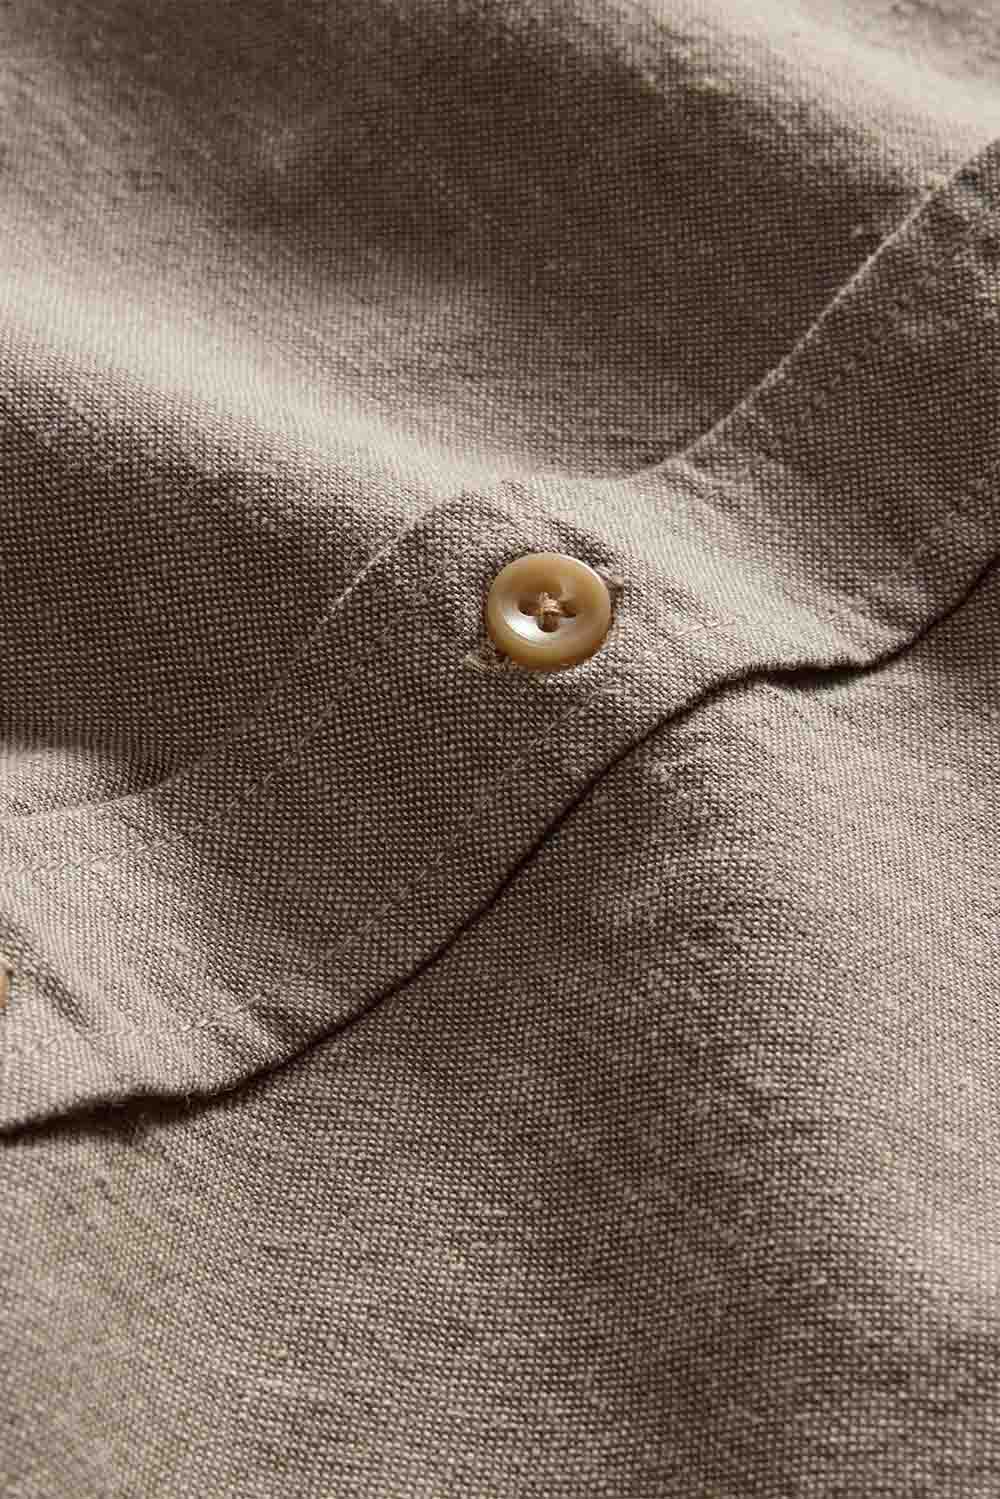 Taylor Stitch - The Utility Shirt - Canteen Nep - Detail